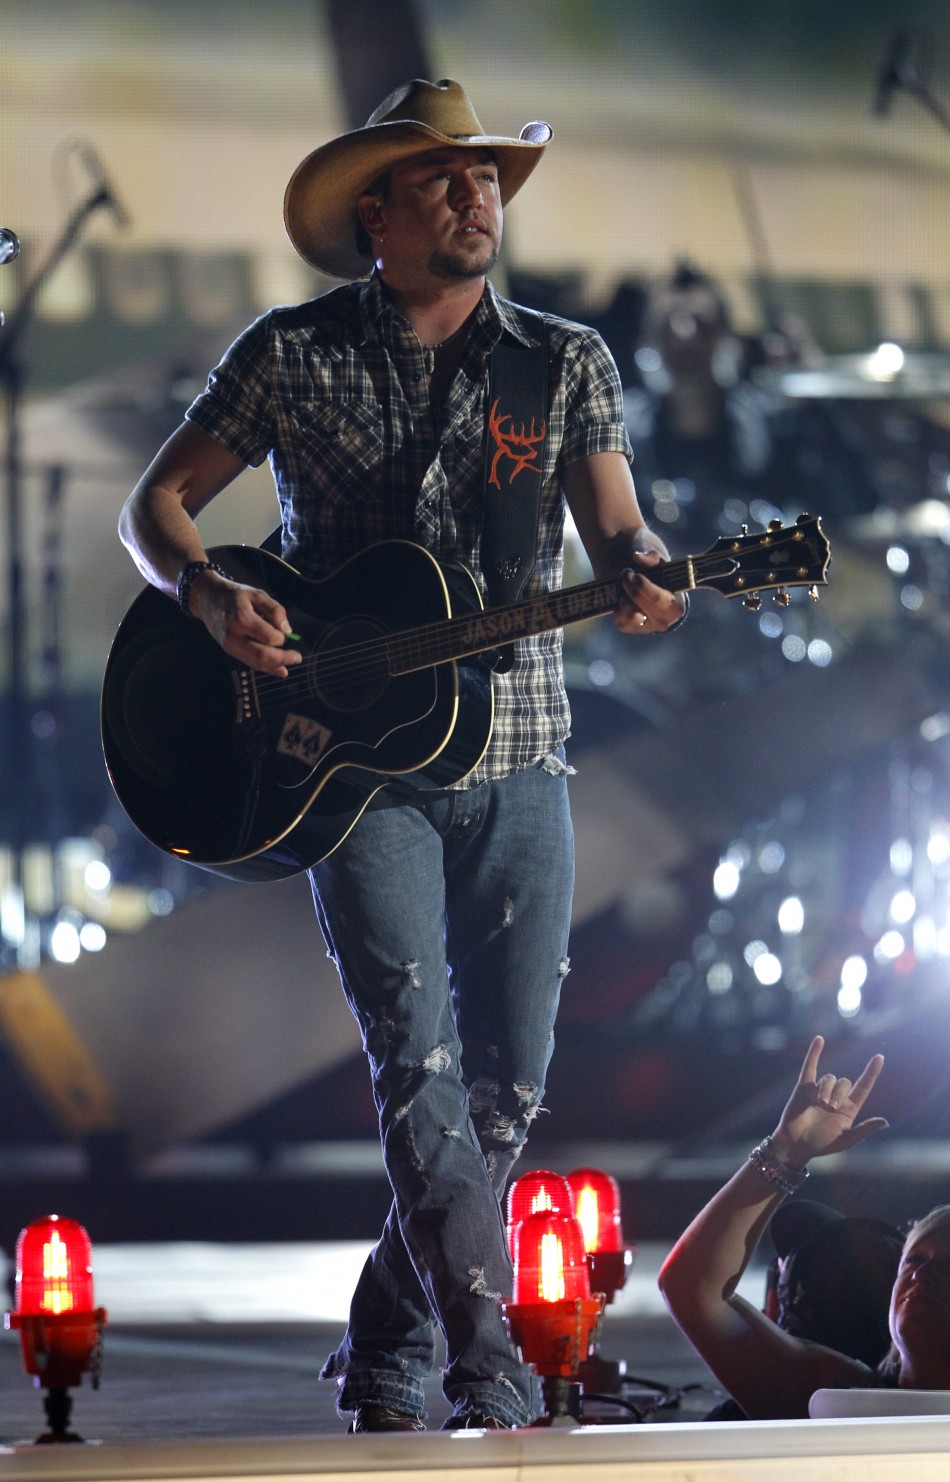 Jason Aldean performs quotFly Over Statesquot at the 47th annual Academy of Country Music Awards in Las Vegas